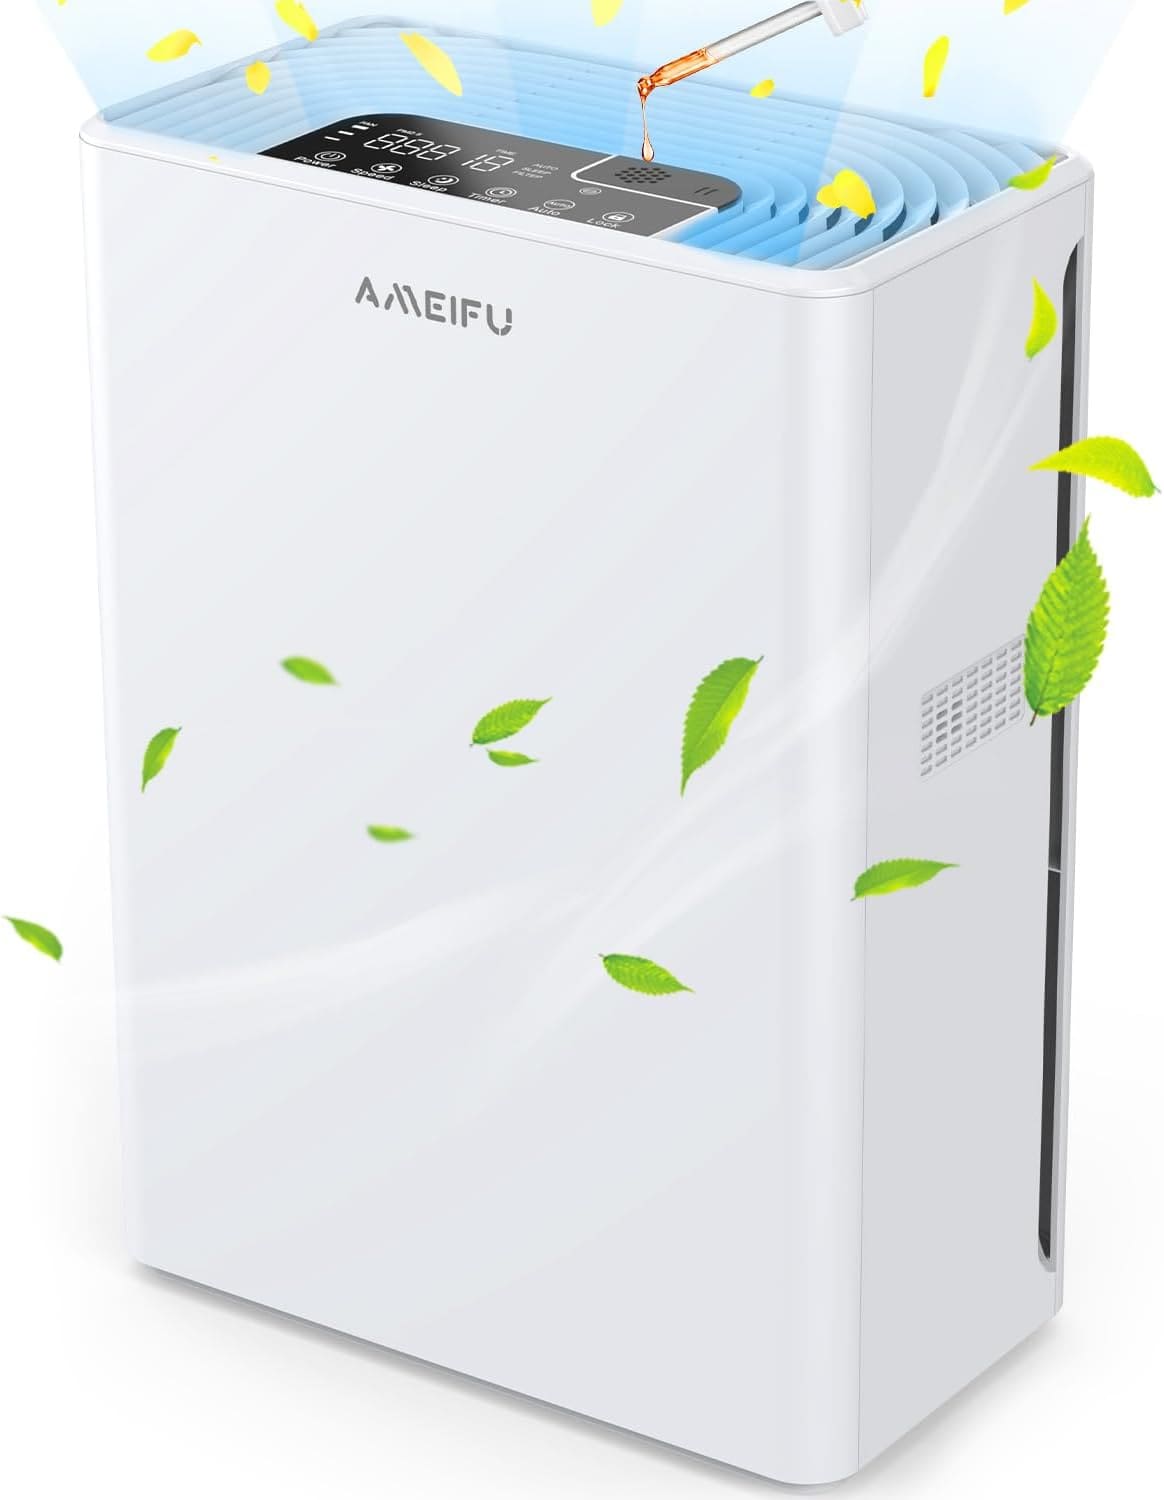 Ameifu air purifier with washable filter